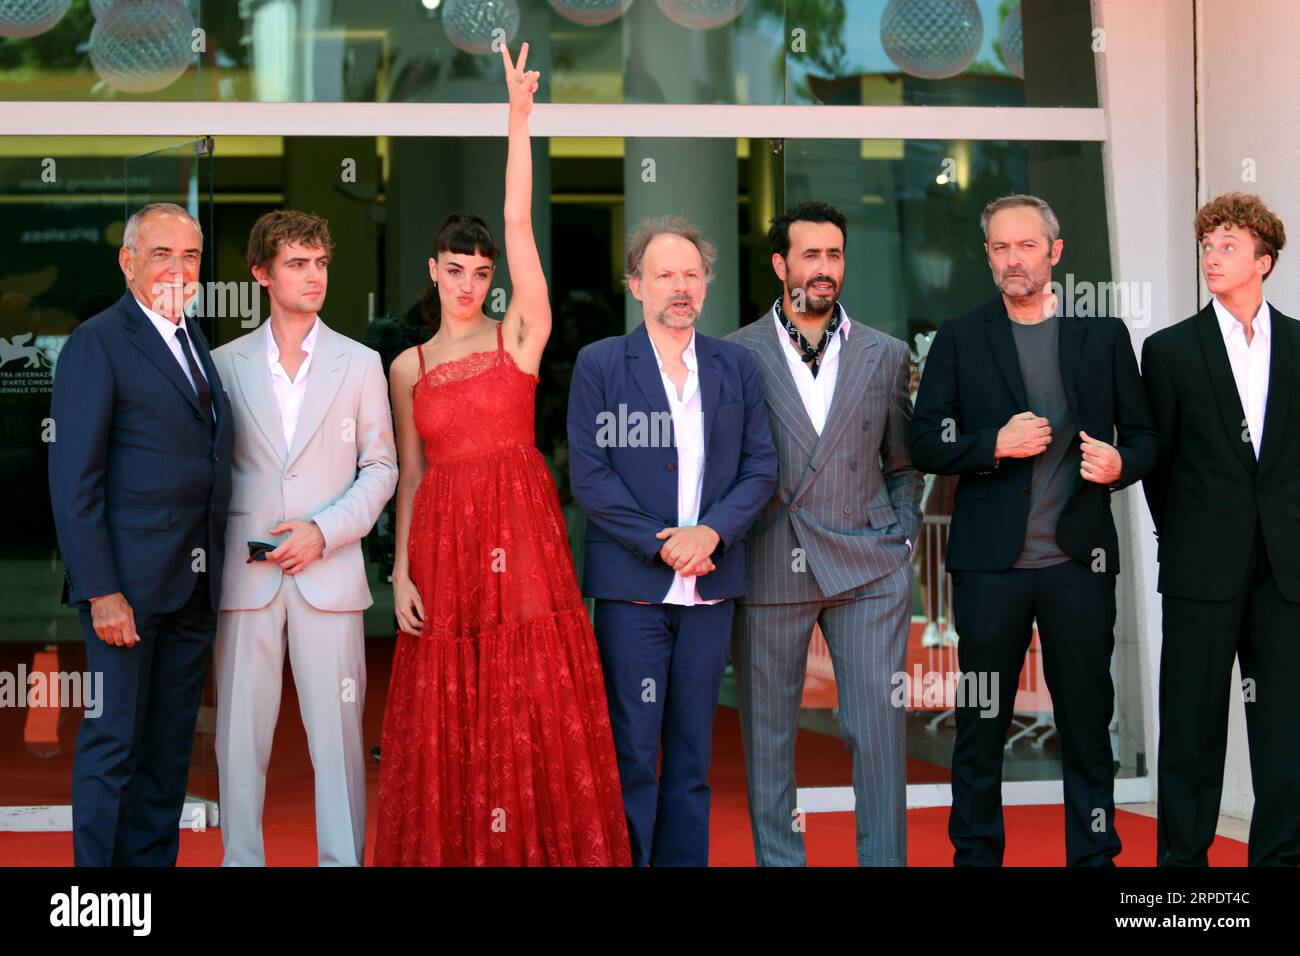 Italy, Lido di Venezia, September 4, 2023: The director Cedric Kahn, with the film cast, attend a red carpet for the movie 'Making of' at the 80th Venice International Film Festival on September 4, 2023 in Venice, Italy.    Photo © Ottavia Da Re/Sintesi/Alamy Live News Stock Photo